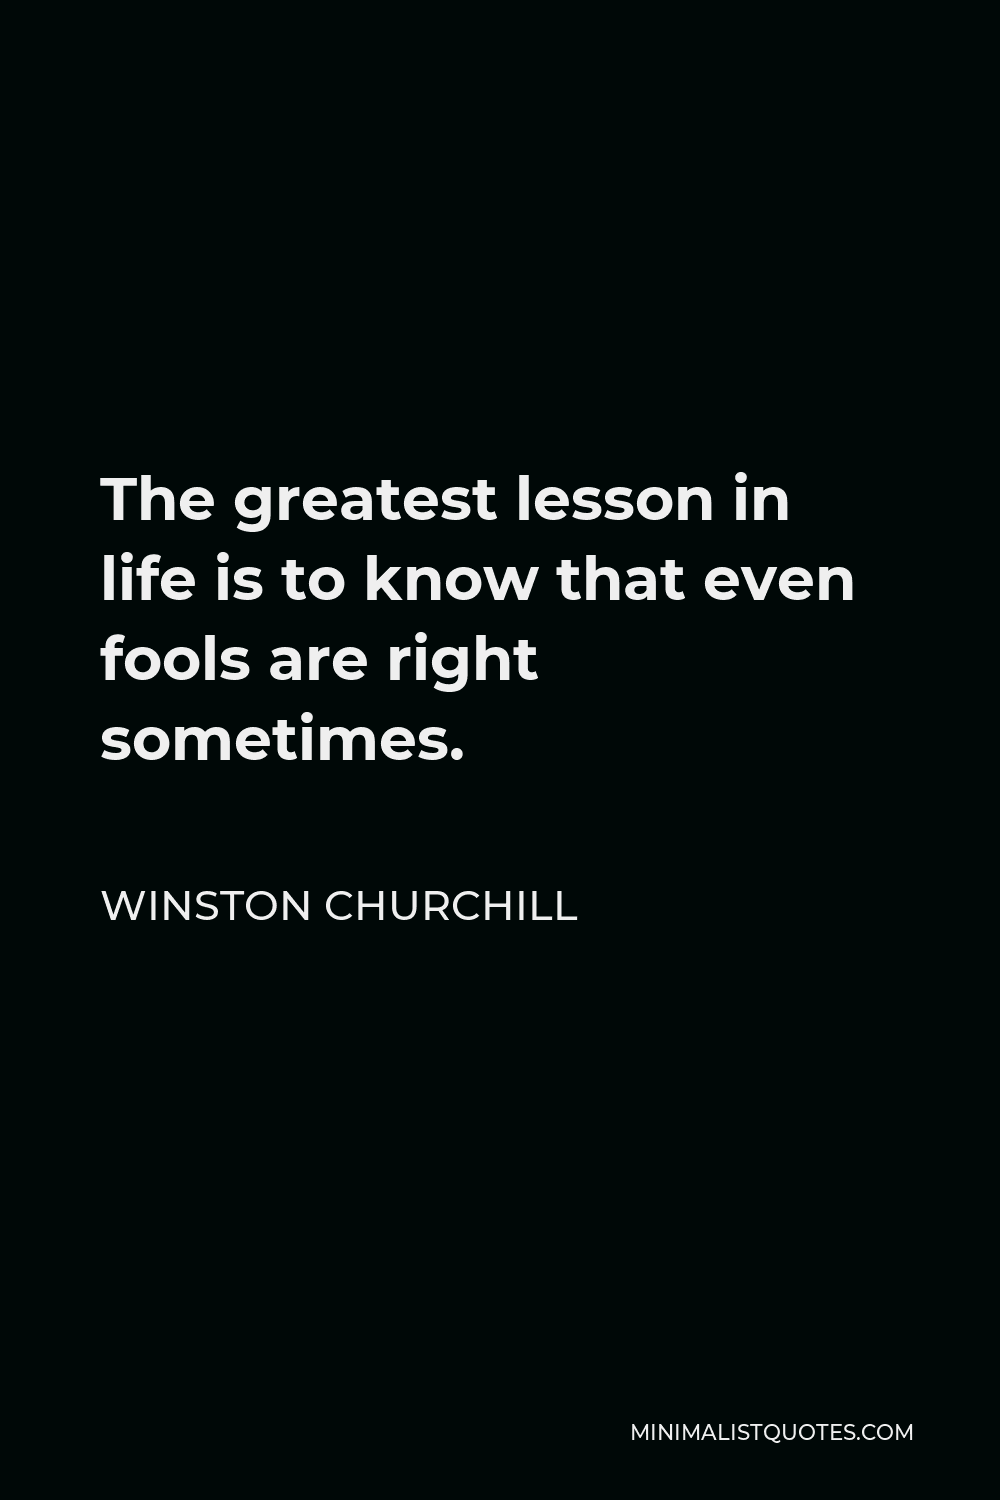 Winston Churchill Quote - The greatest lesson in life is to know that even fools are right sometimes.